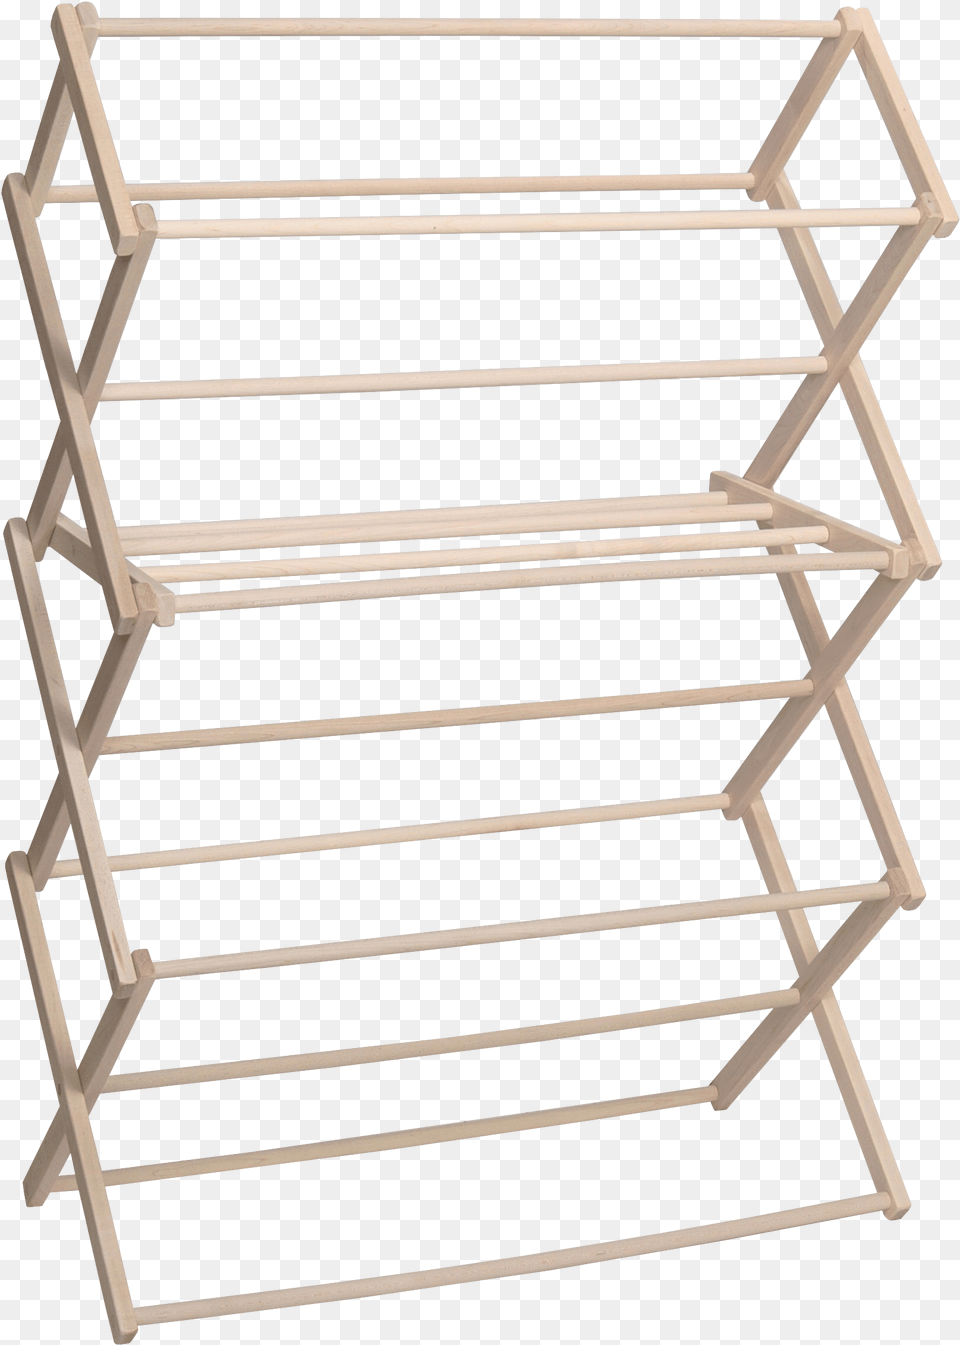 Pennsylvania Woodworks Large Wooden Clothes Drying, Drying Rack, Crib, Furniture, Infant Bed Png